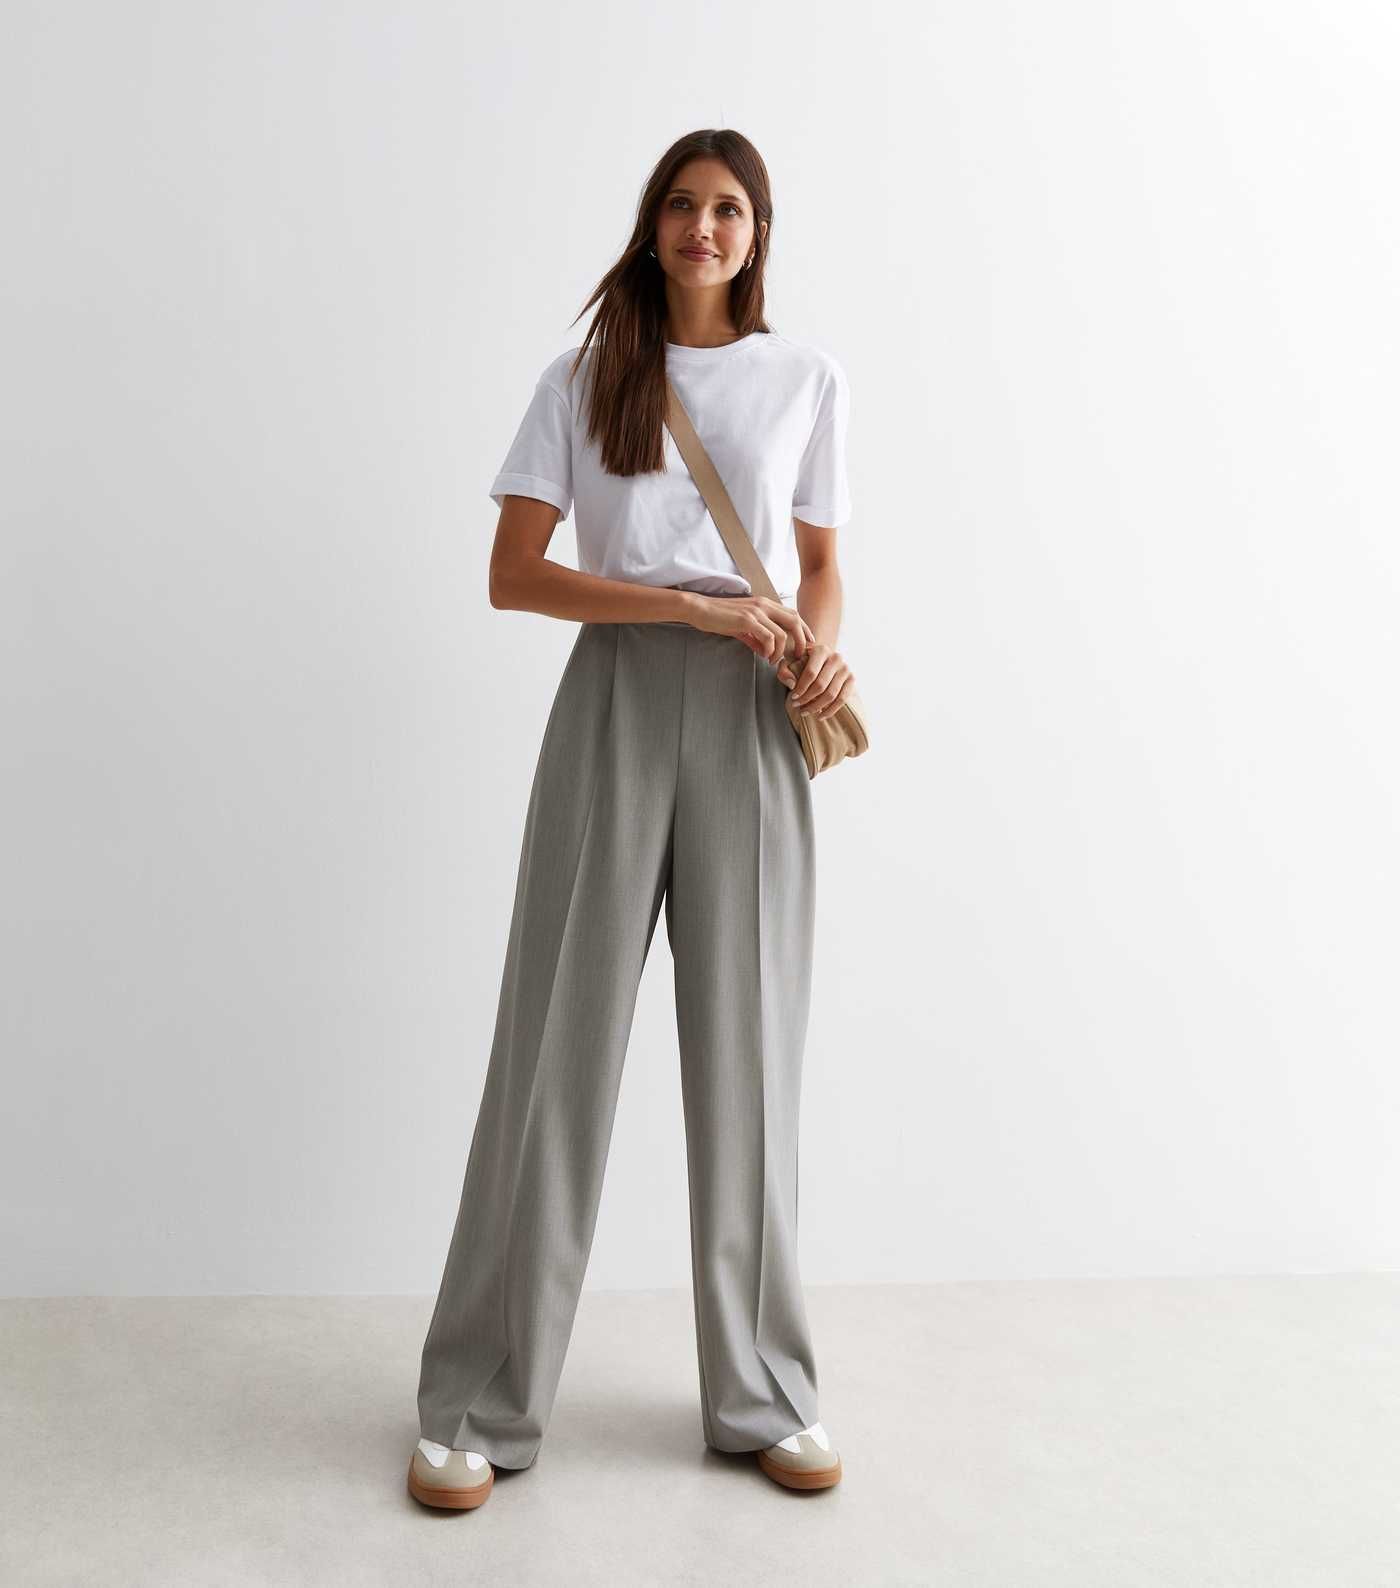 Grey Marl High Waist Tailored Wide Leg Trousers
						
						Add to Saved Items
						Remove from... | New Look (UK)